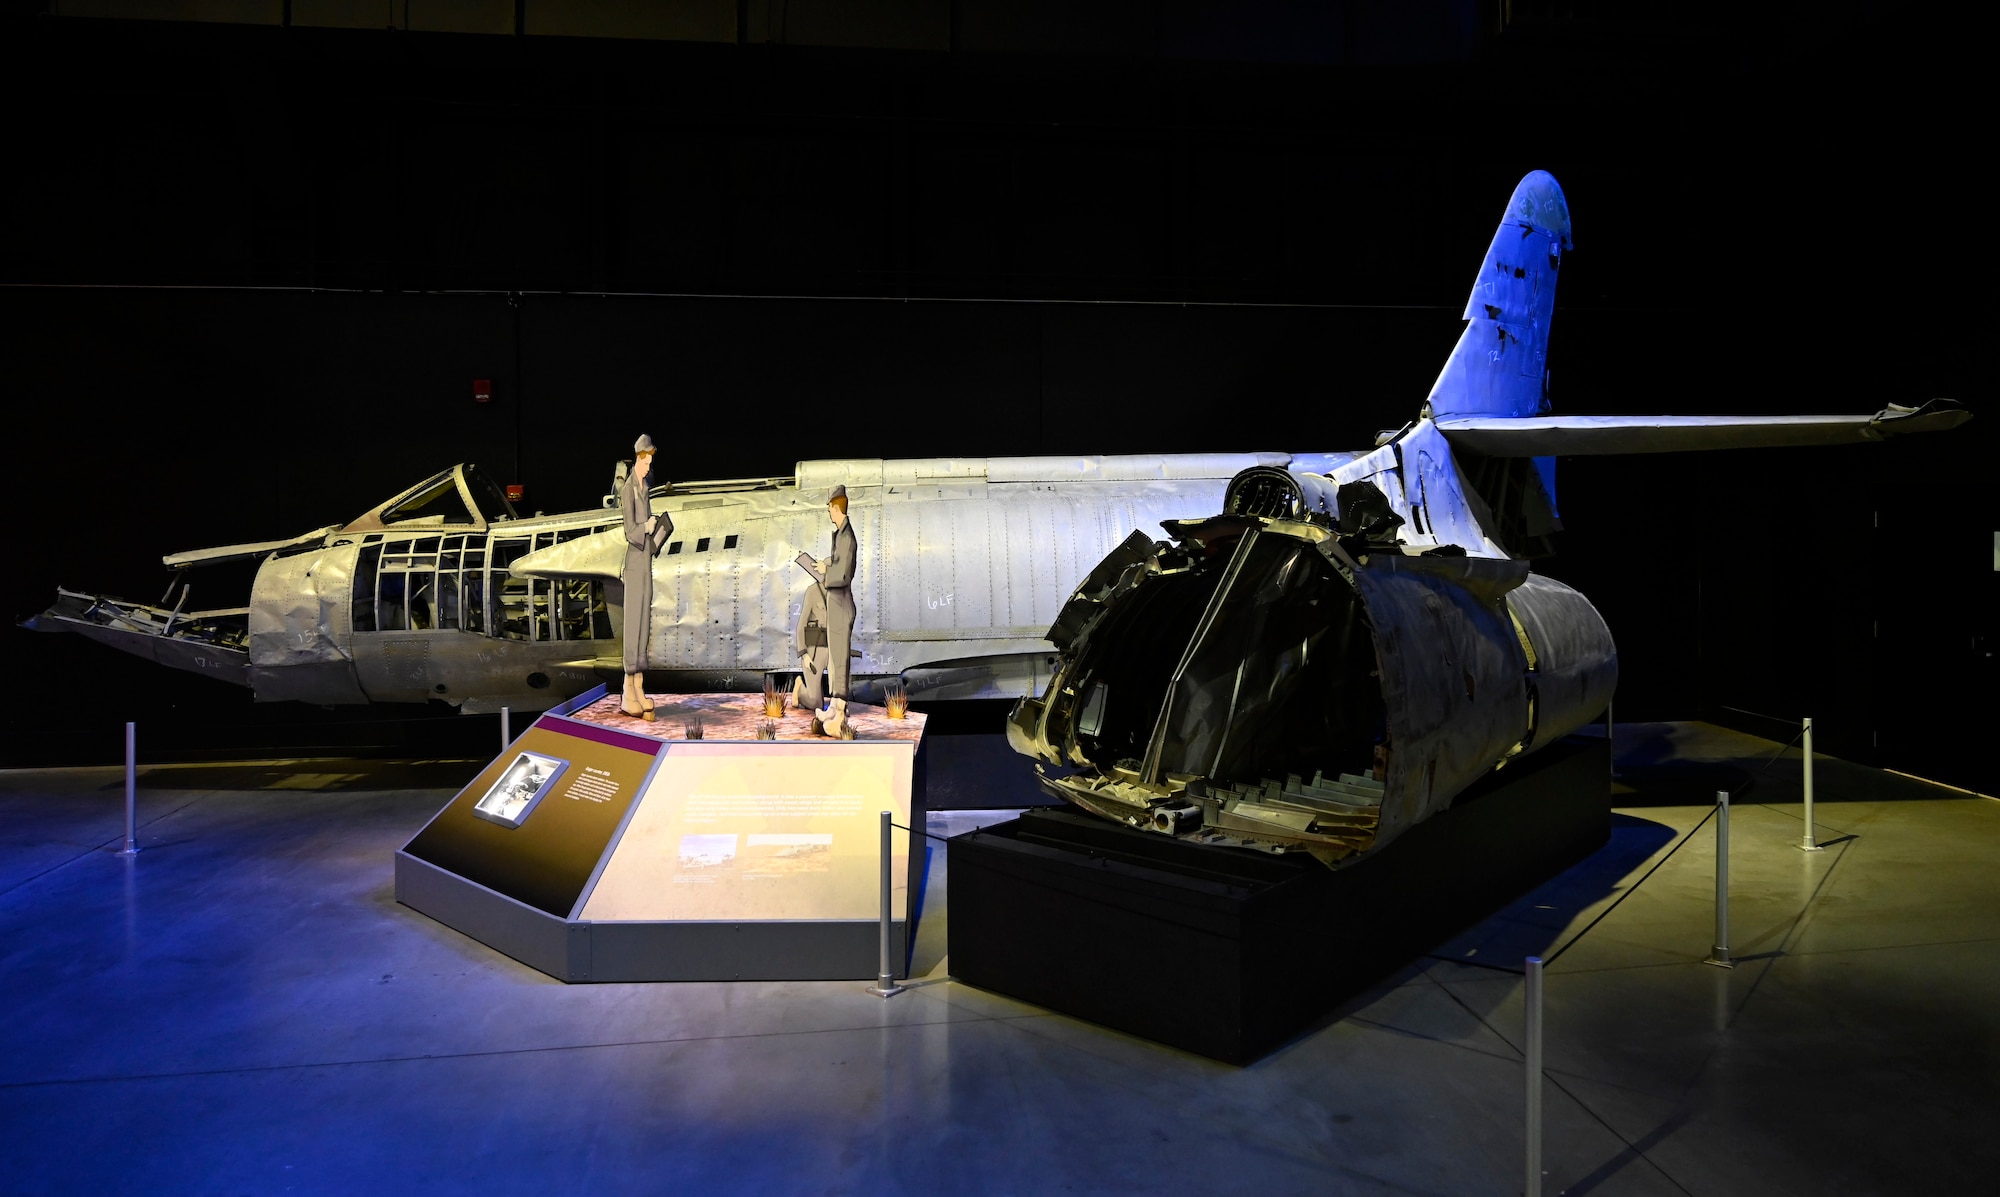 Lockheed XF-90 on display in the National Museum of the U.S. Air Force Cold War Gallery..